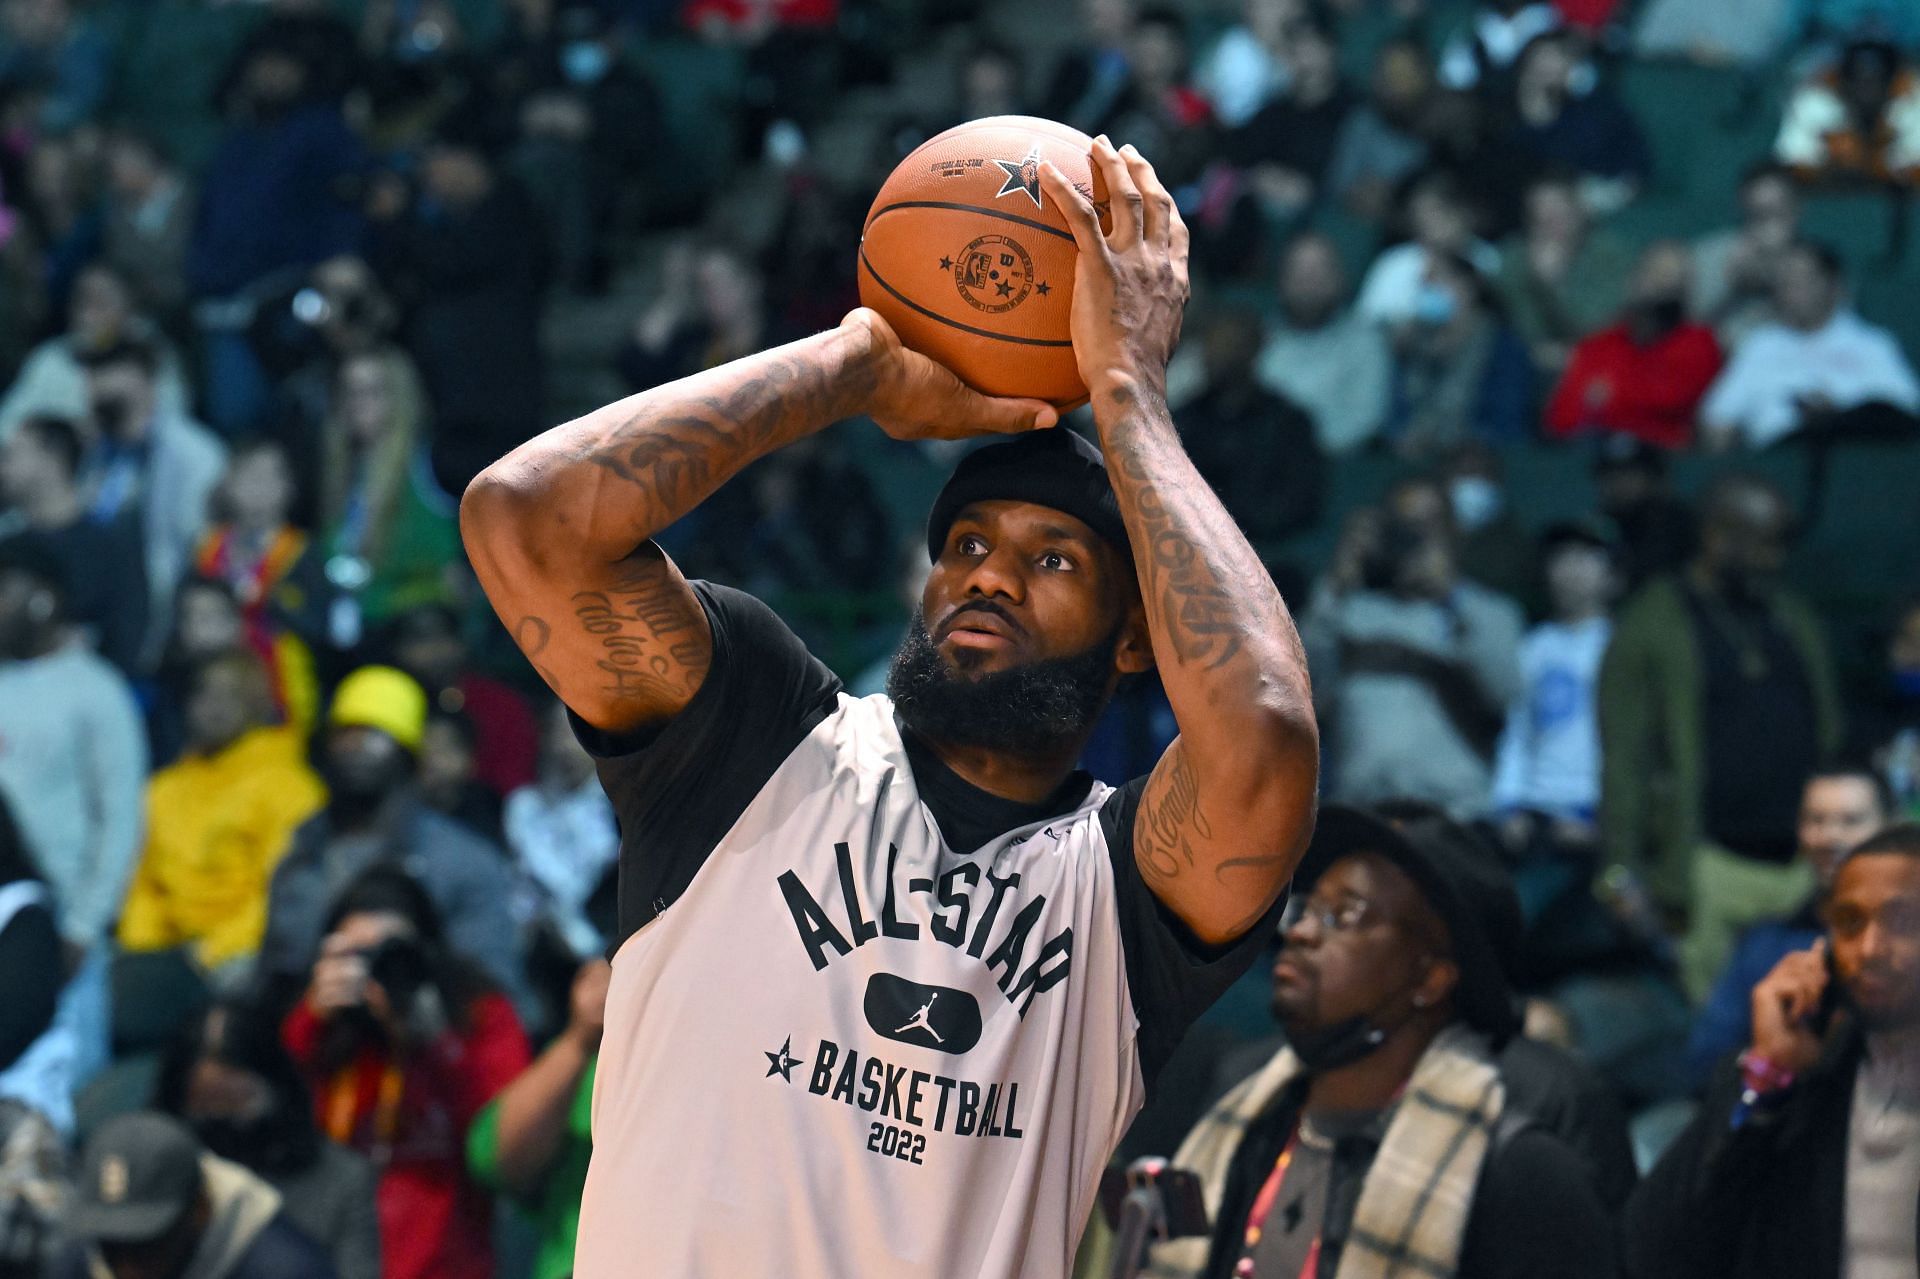 LeBron James in his 18th All-Star Game